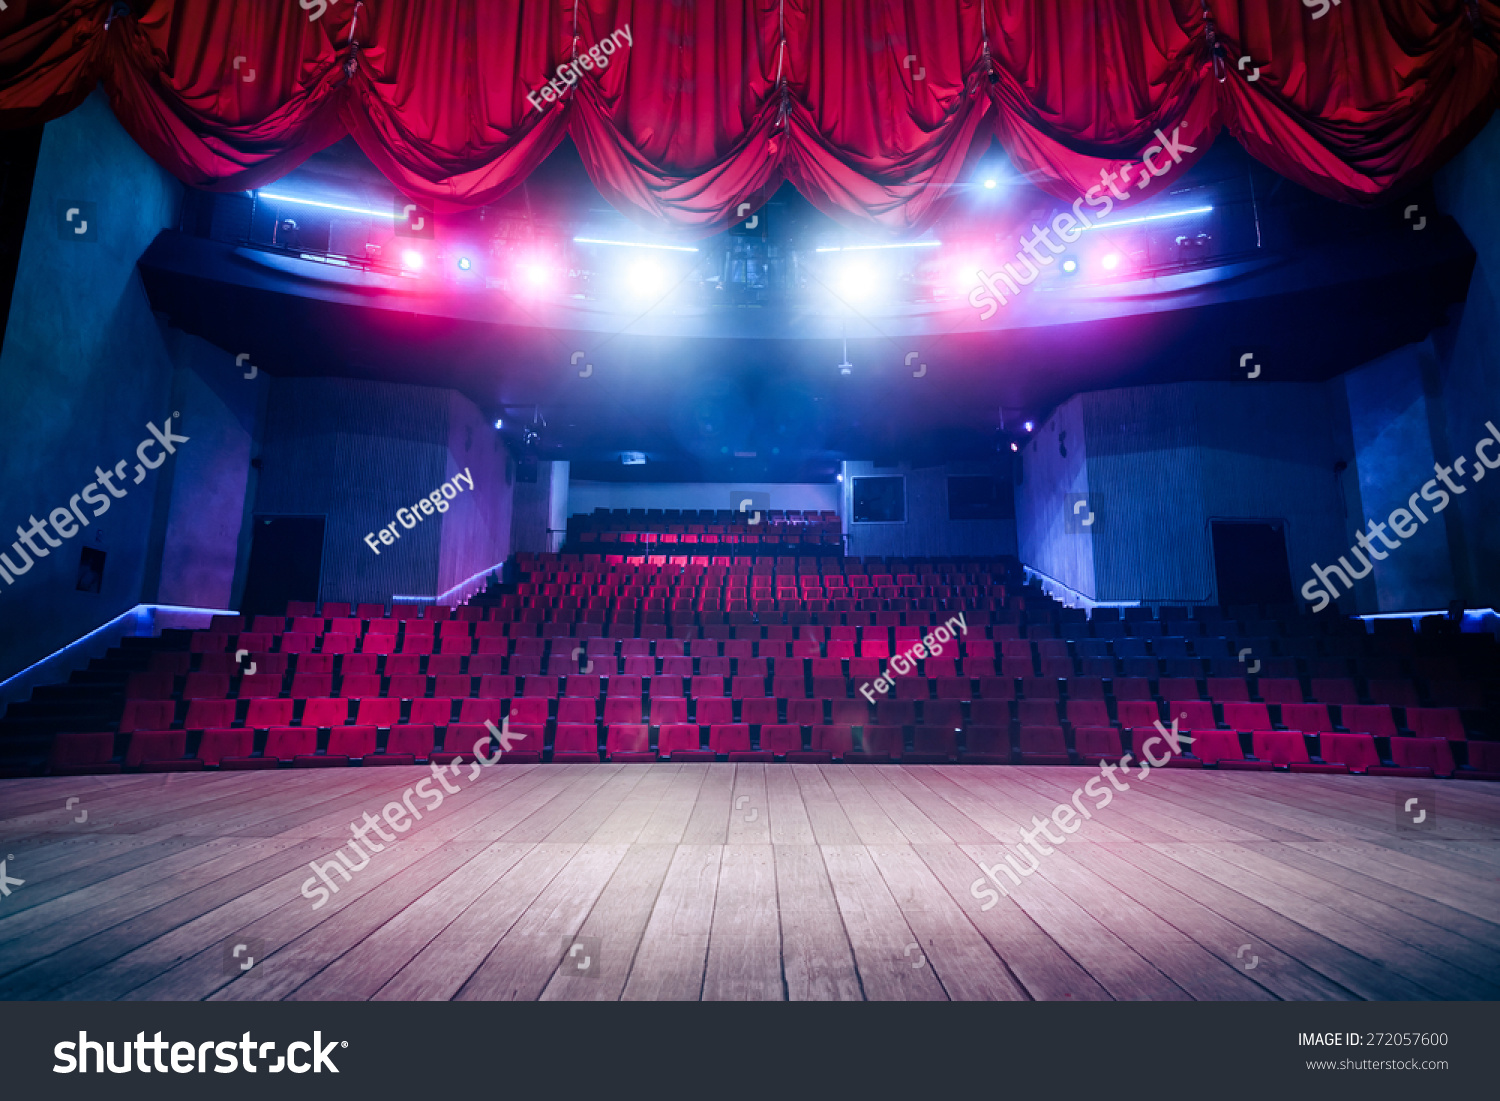 Theater curtain and stage with dramatic lighting #272057600